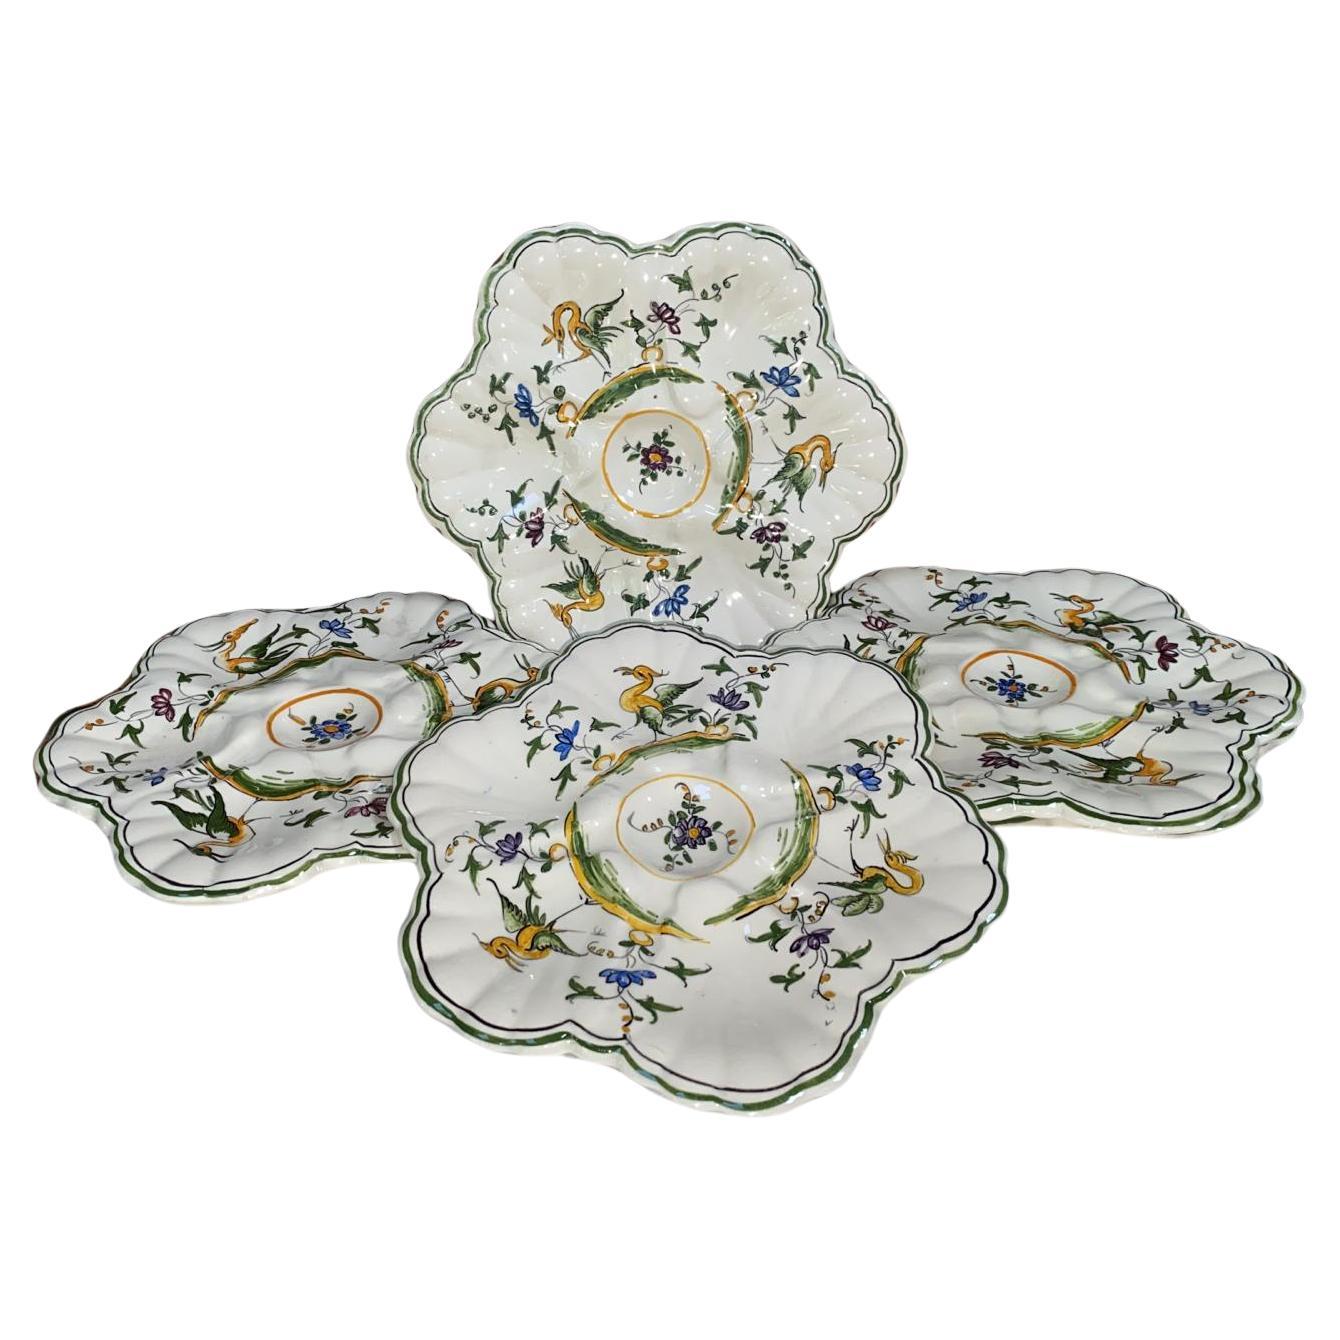 Set of 12 French Faience oysters plates & 1 platter signed Cabare circa 1950.
Decor of birds and flowers
platter 15.5 inches , 12 plates 9.5 inches diameter.